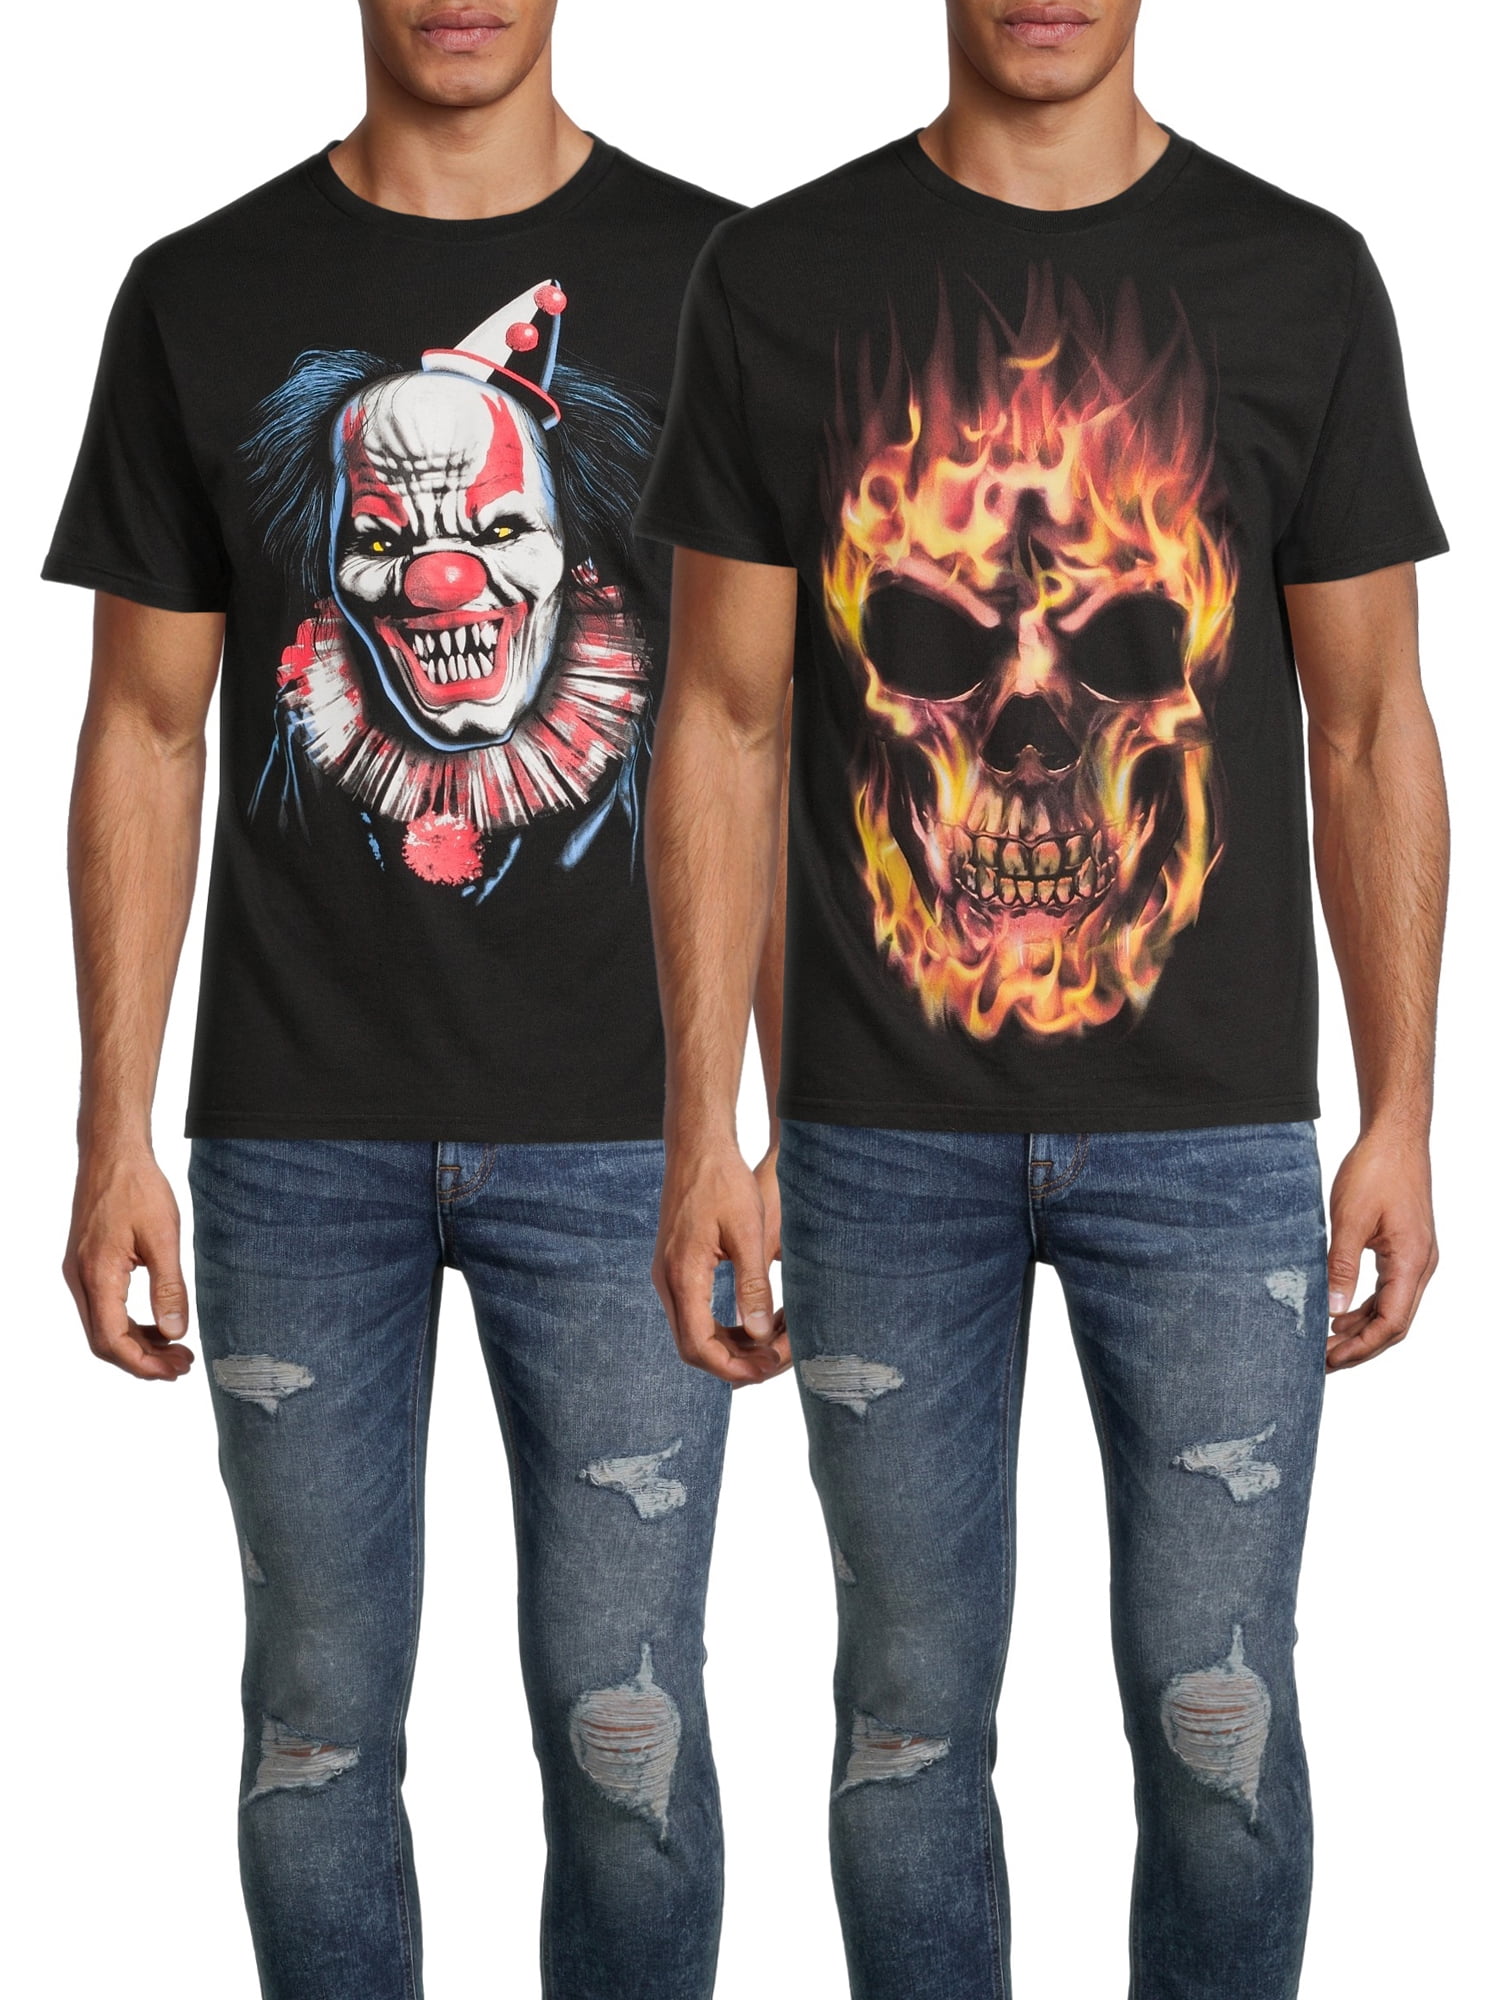 Mens Plus Size T-Shirts 3D Skull Print Shirt Tops Personality Long Sleeve Sweatshirt Graphic Tees for Halloween